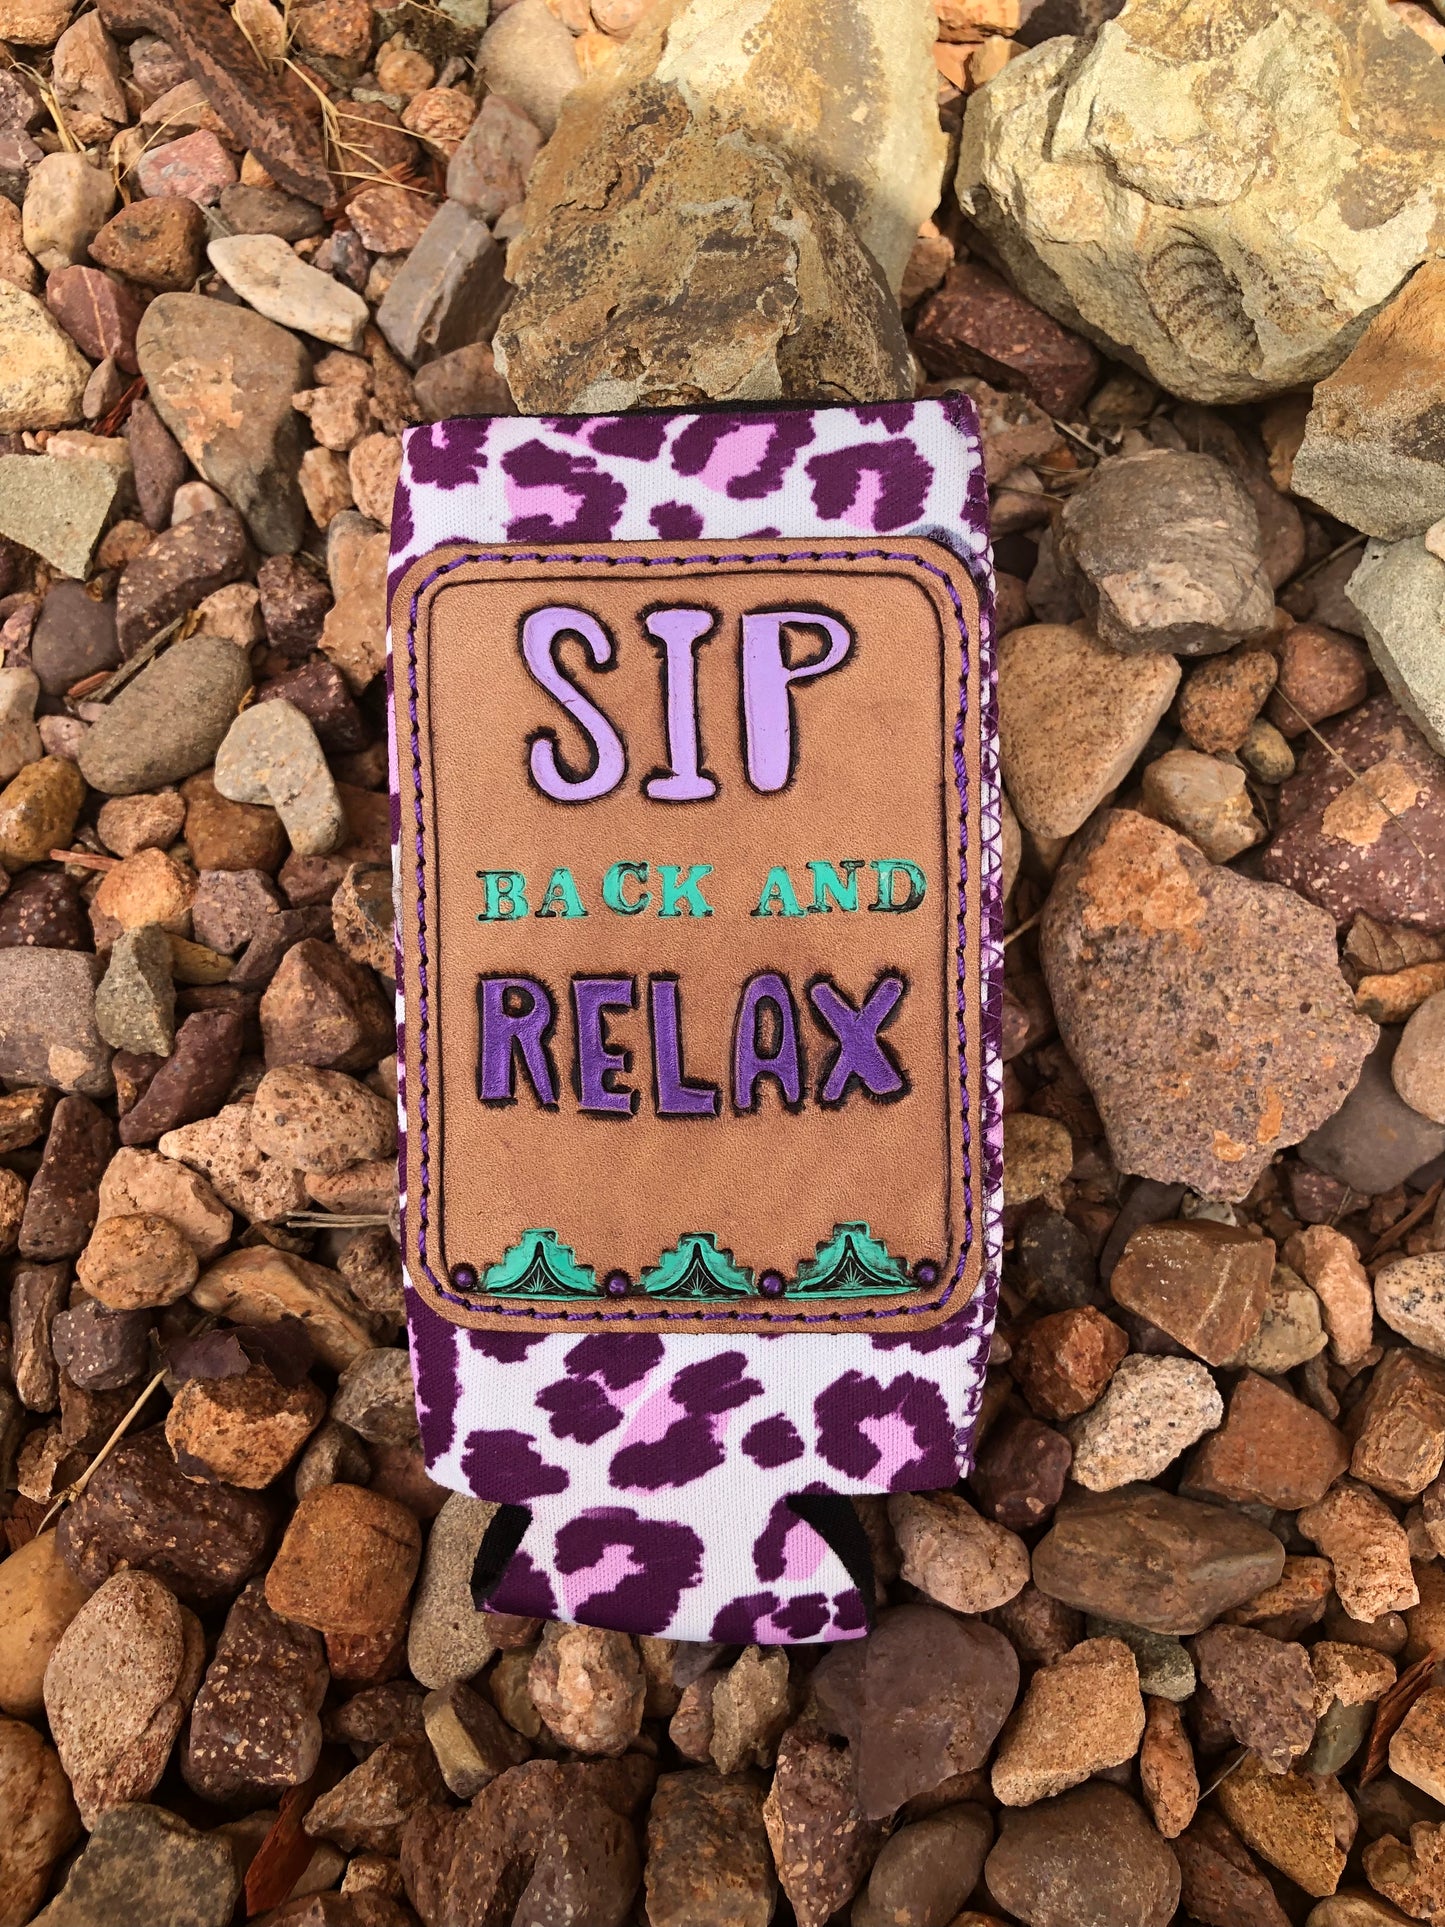 Western tooled leather sip back and relax slim can koozie